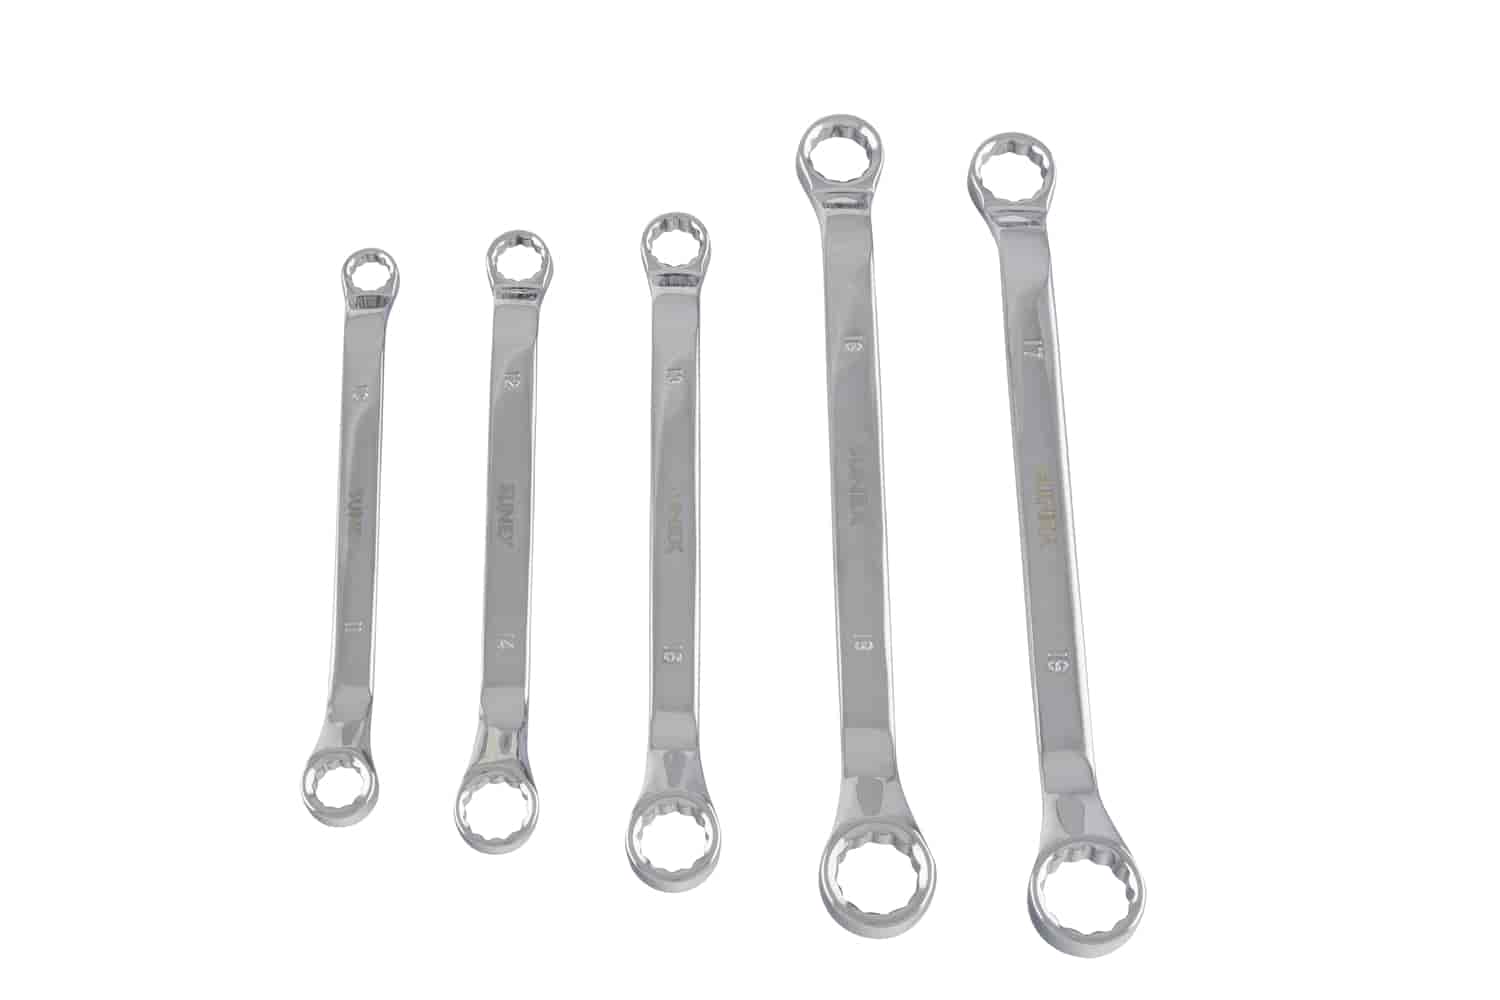 5 Pc. Fully Polished Metric Double Box Wrench Set